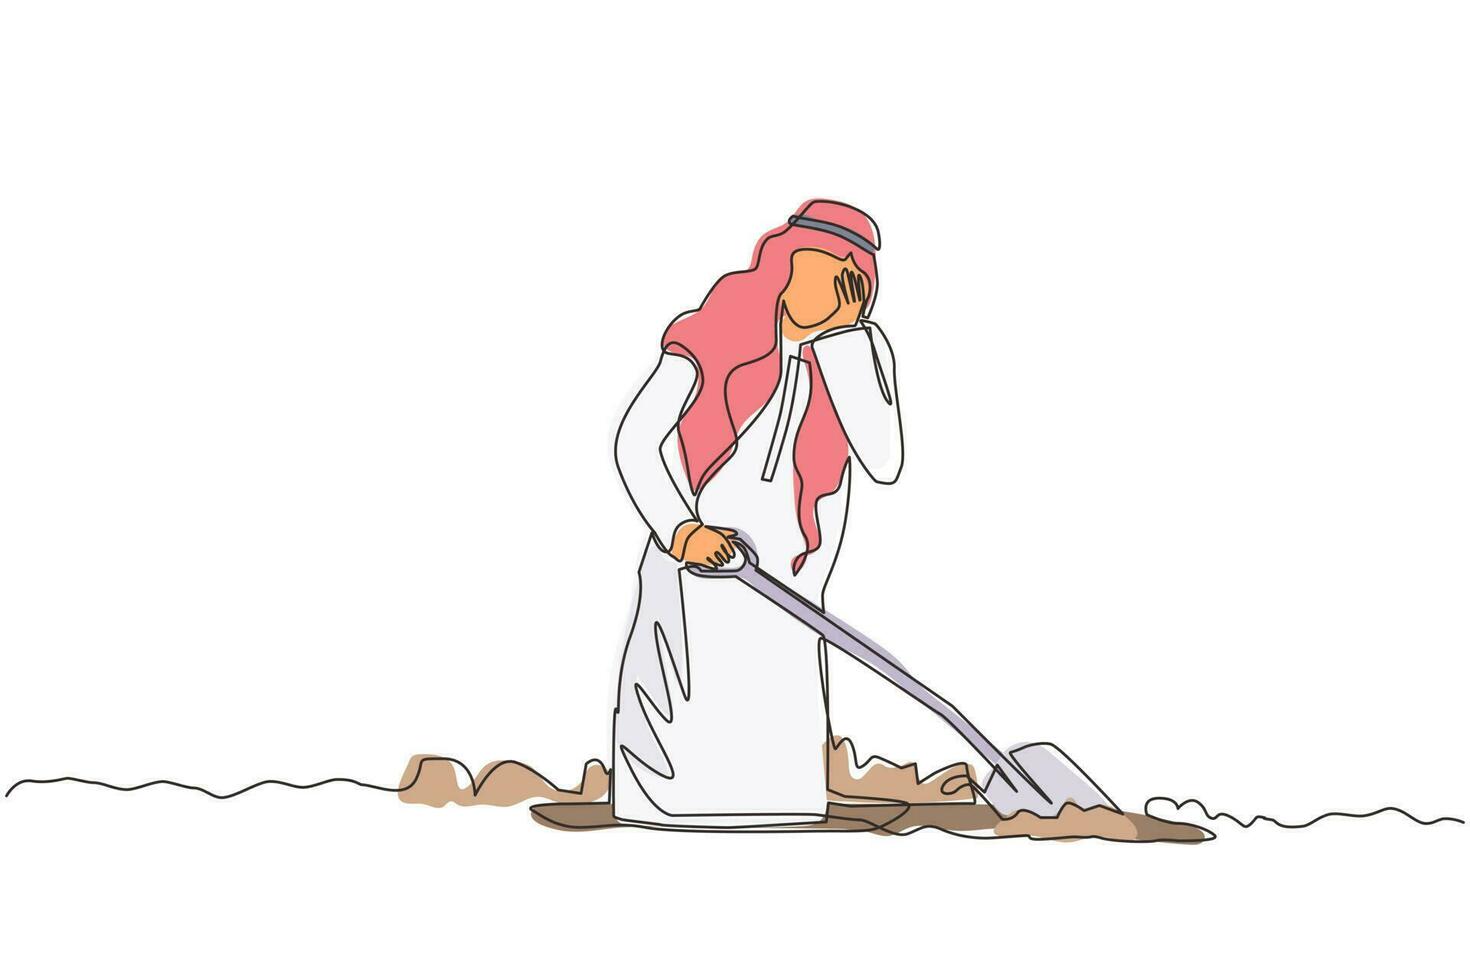 Continuous one line drawing Arabic businessman wipes sweat on his forehead while digging hole. Worker never give up to finish his job. Work hard concept. Single line design vector graphic illustration